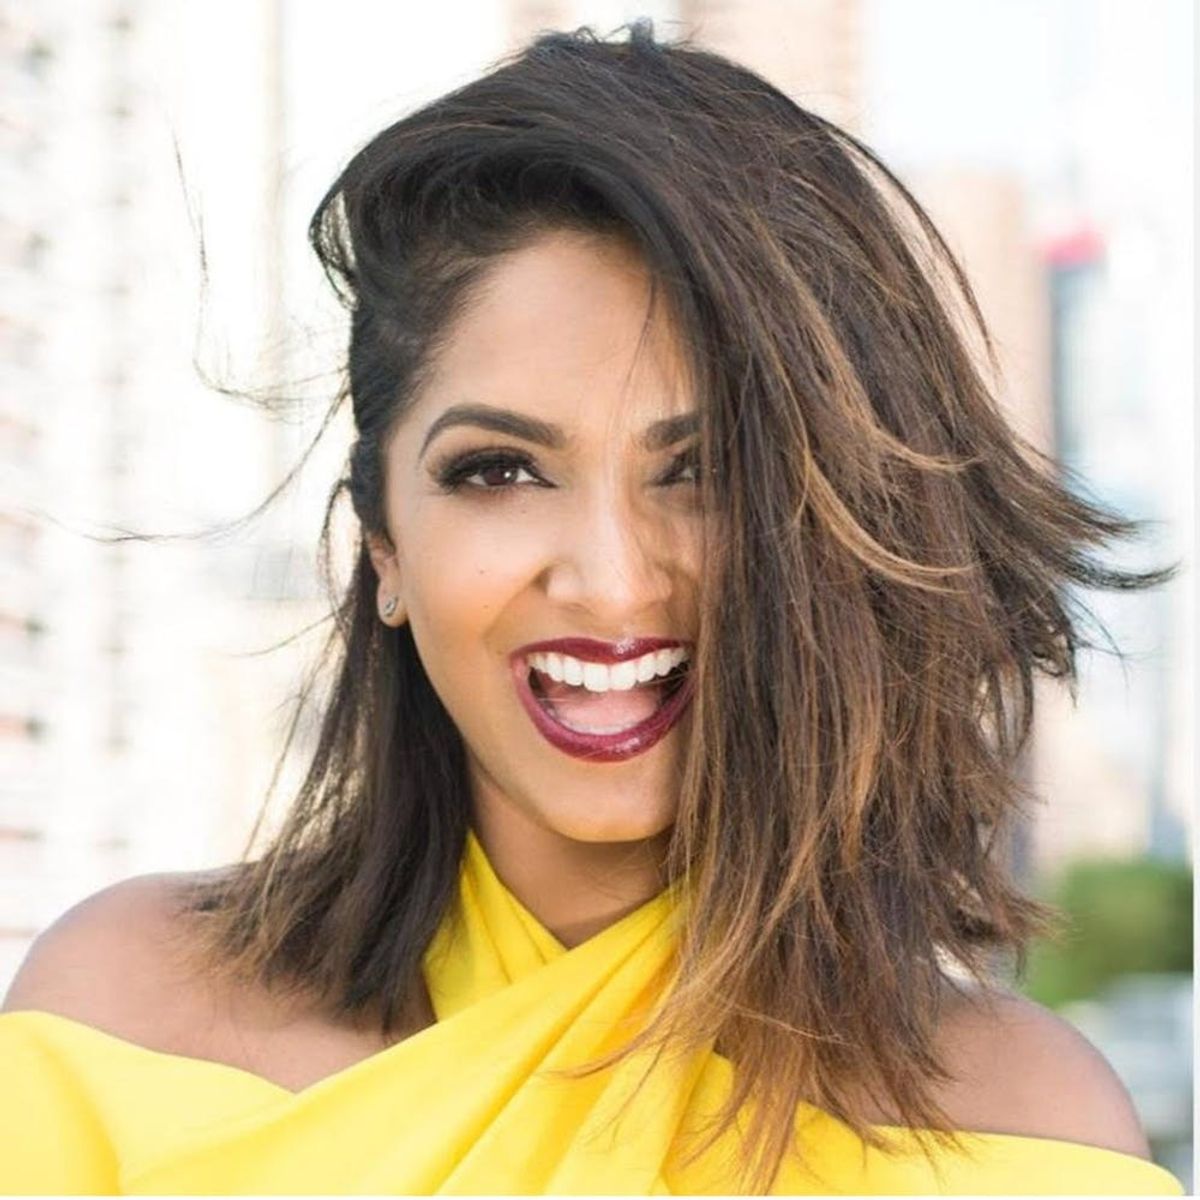 How This Beauty Guru Created a Community Focused on Empowering Brown Women